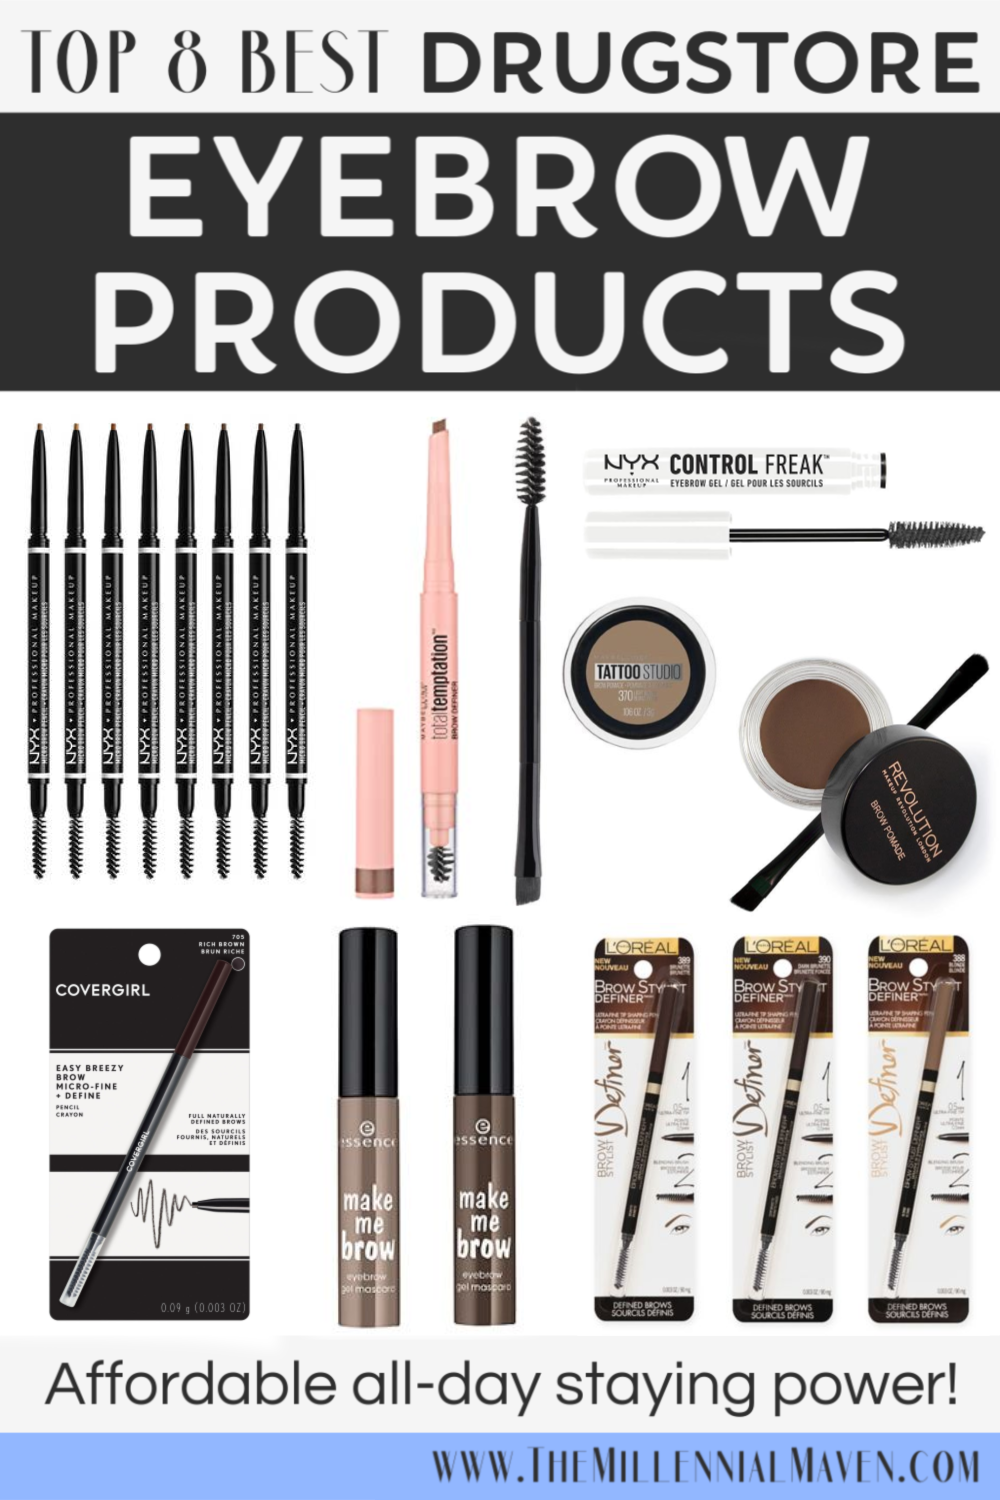 Top 10 Best Drugstore Eyebrow Products in 2021! | Best Drugstore Brow Products